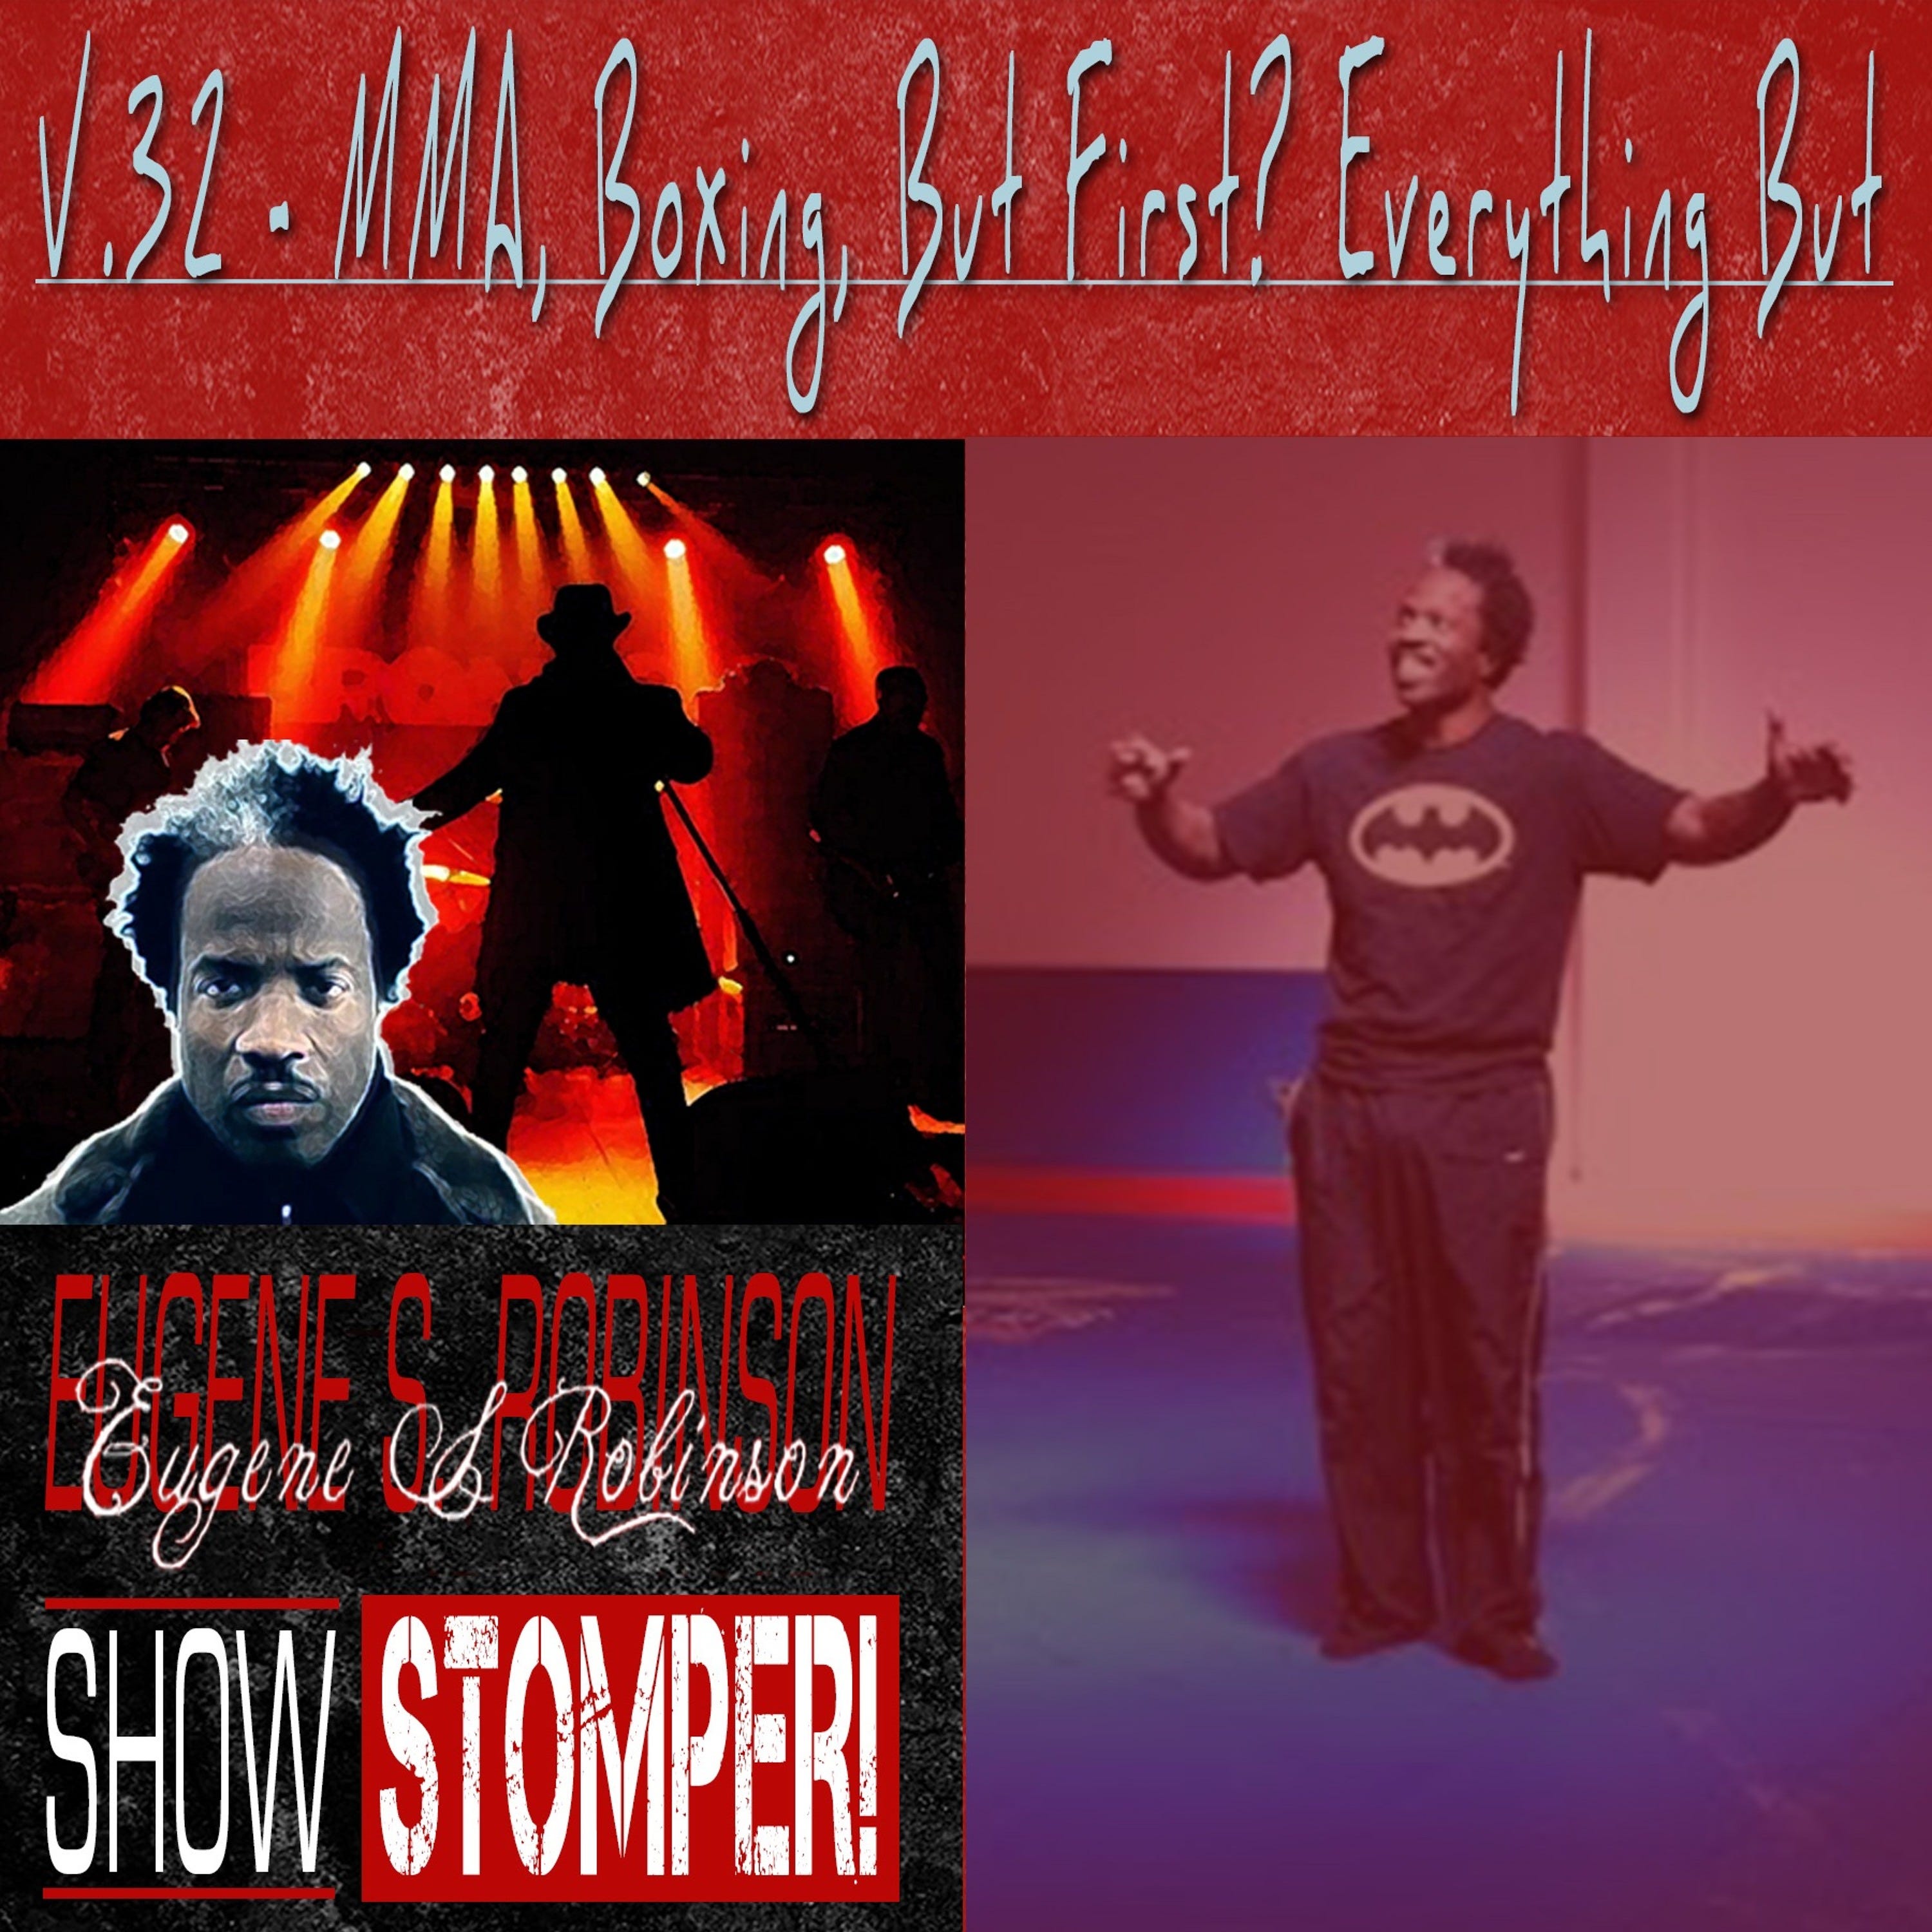 The Eugene S. Robinson Show Stomper! V.32 - MMA Boxing, But First - Everything But